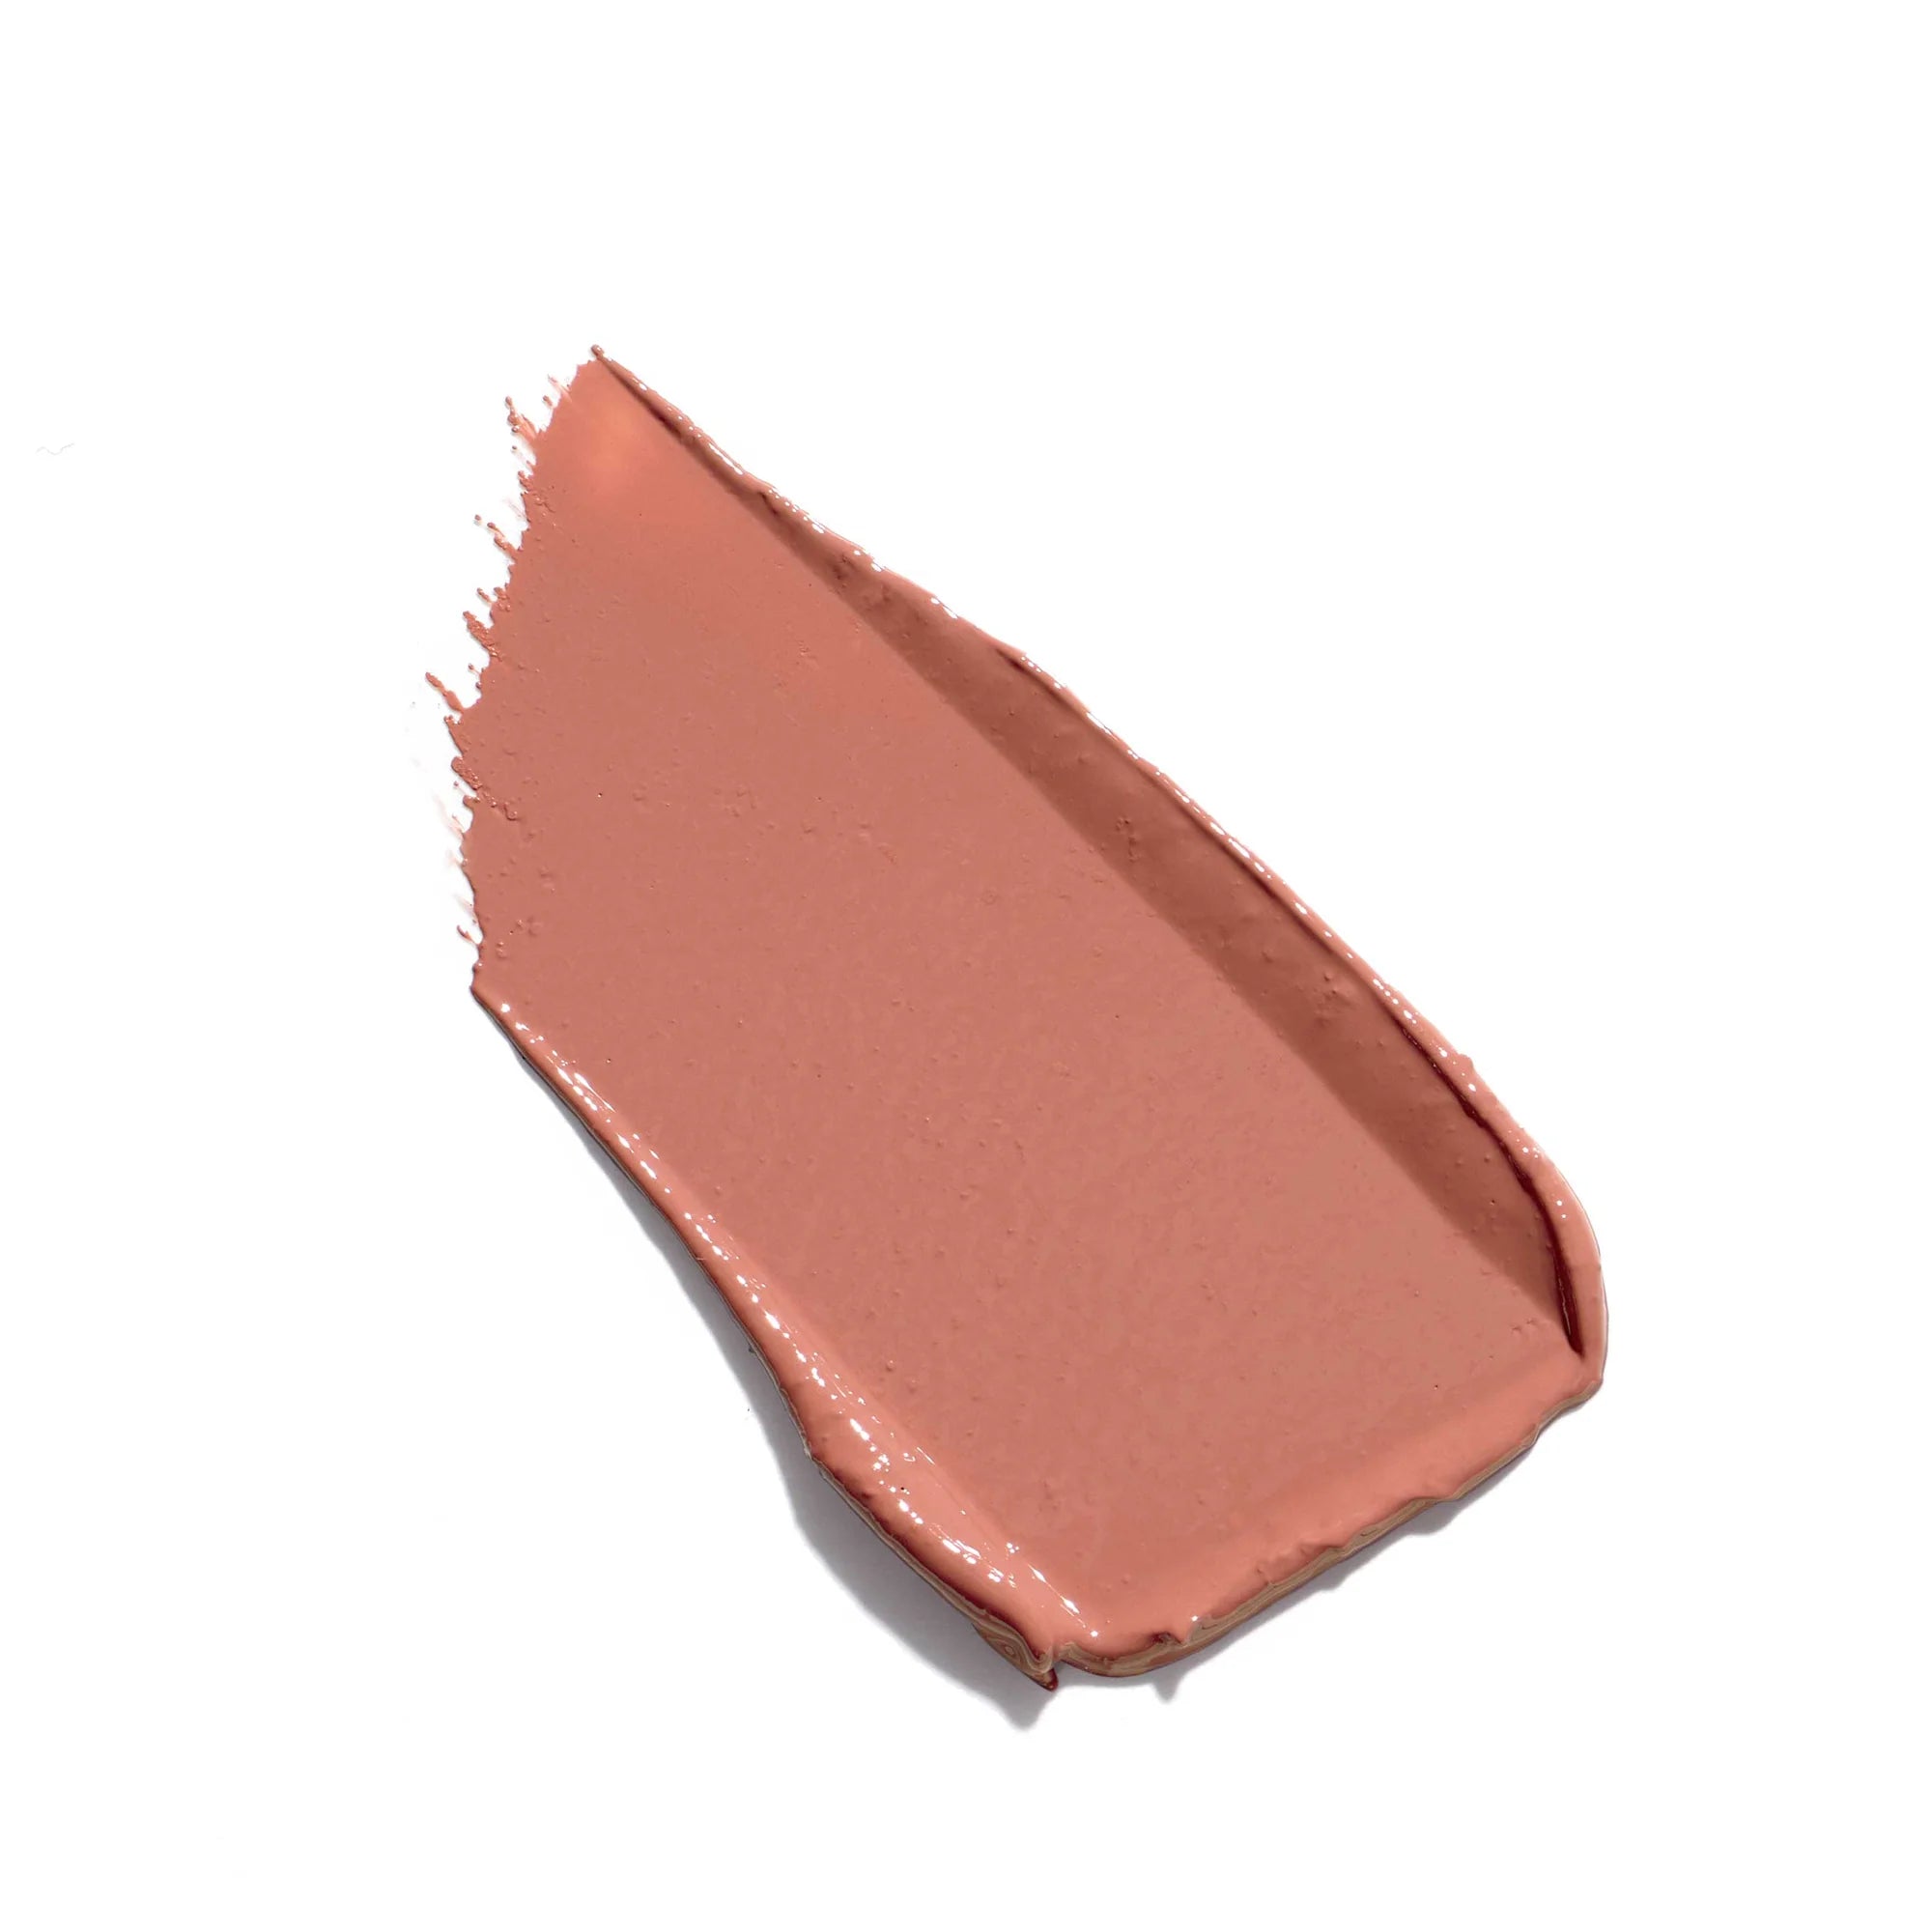 Jane Iredale's ColorLuxe Hydrating Cream Lipstick - swatch and color Bellini - warm light pink beige